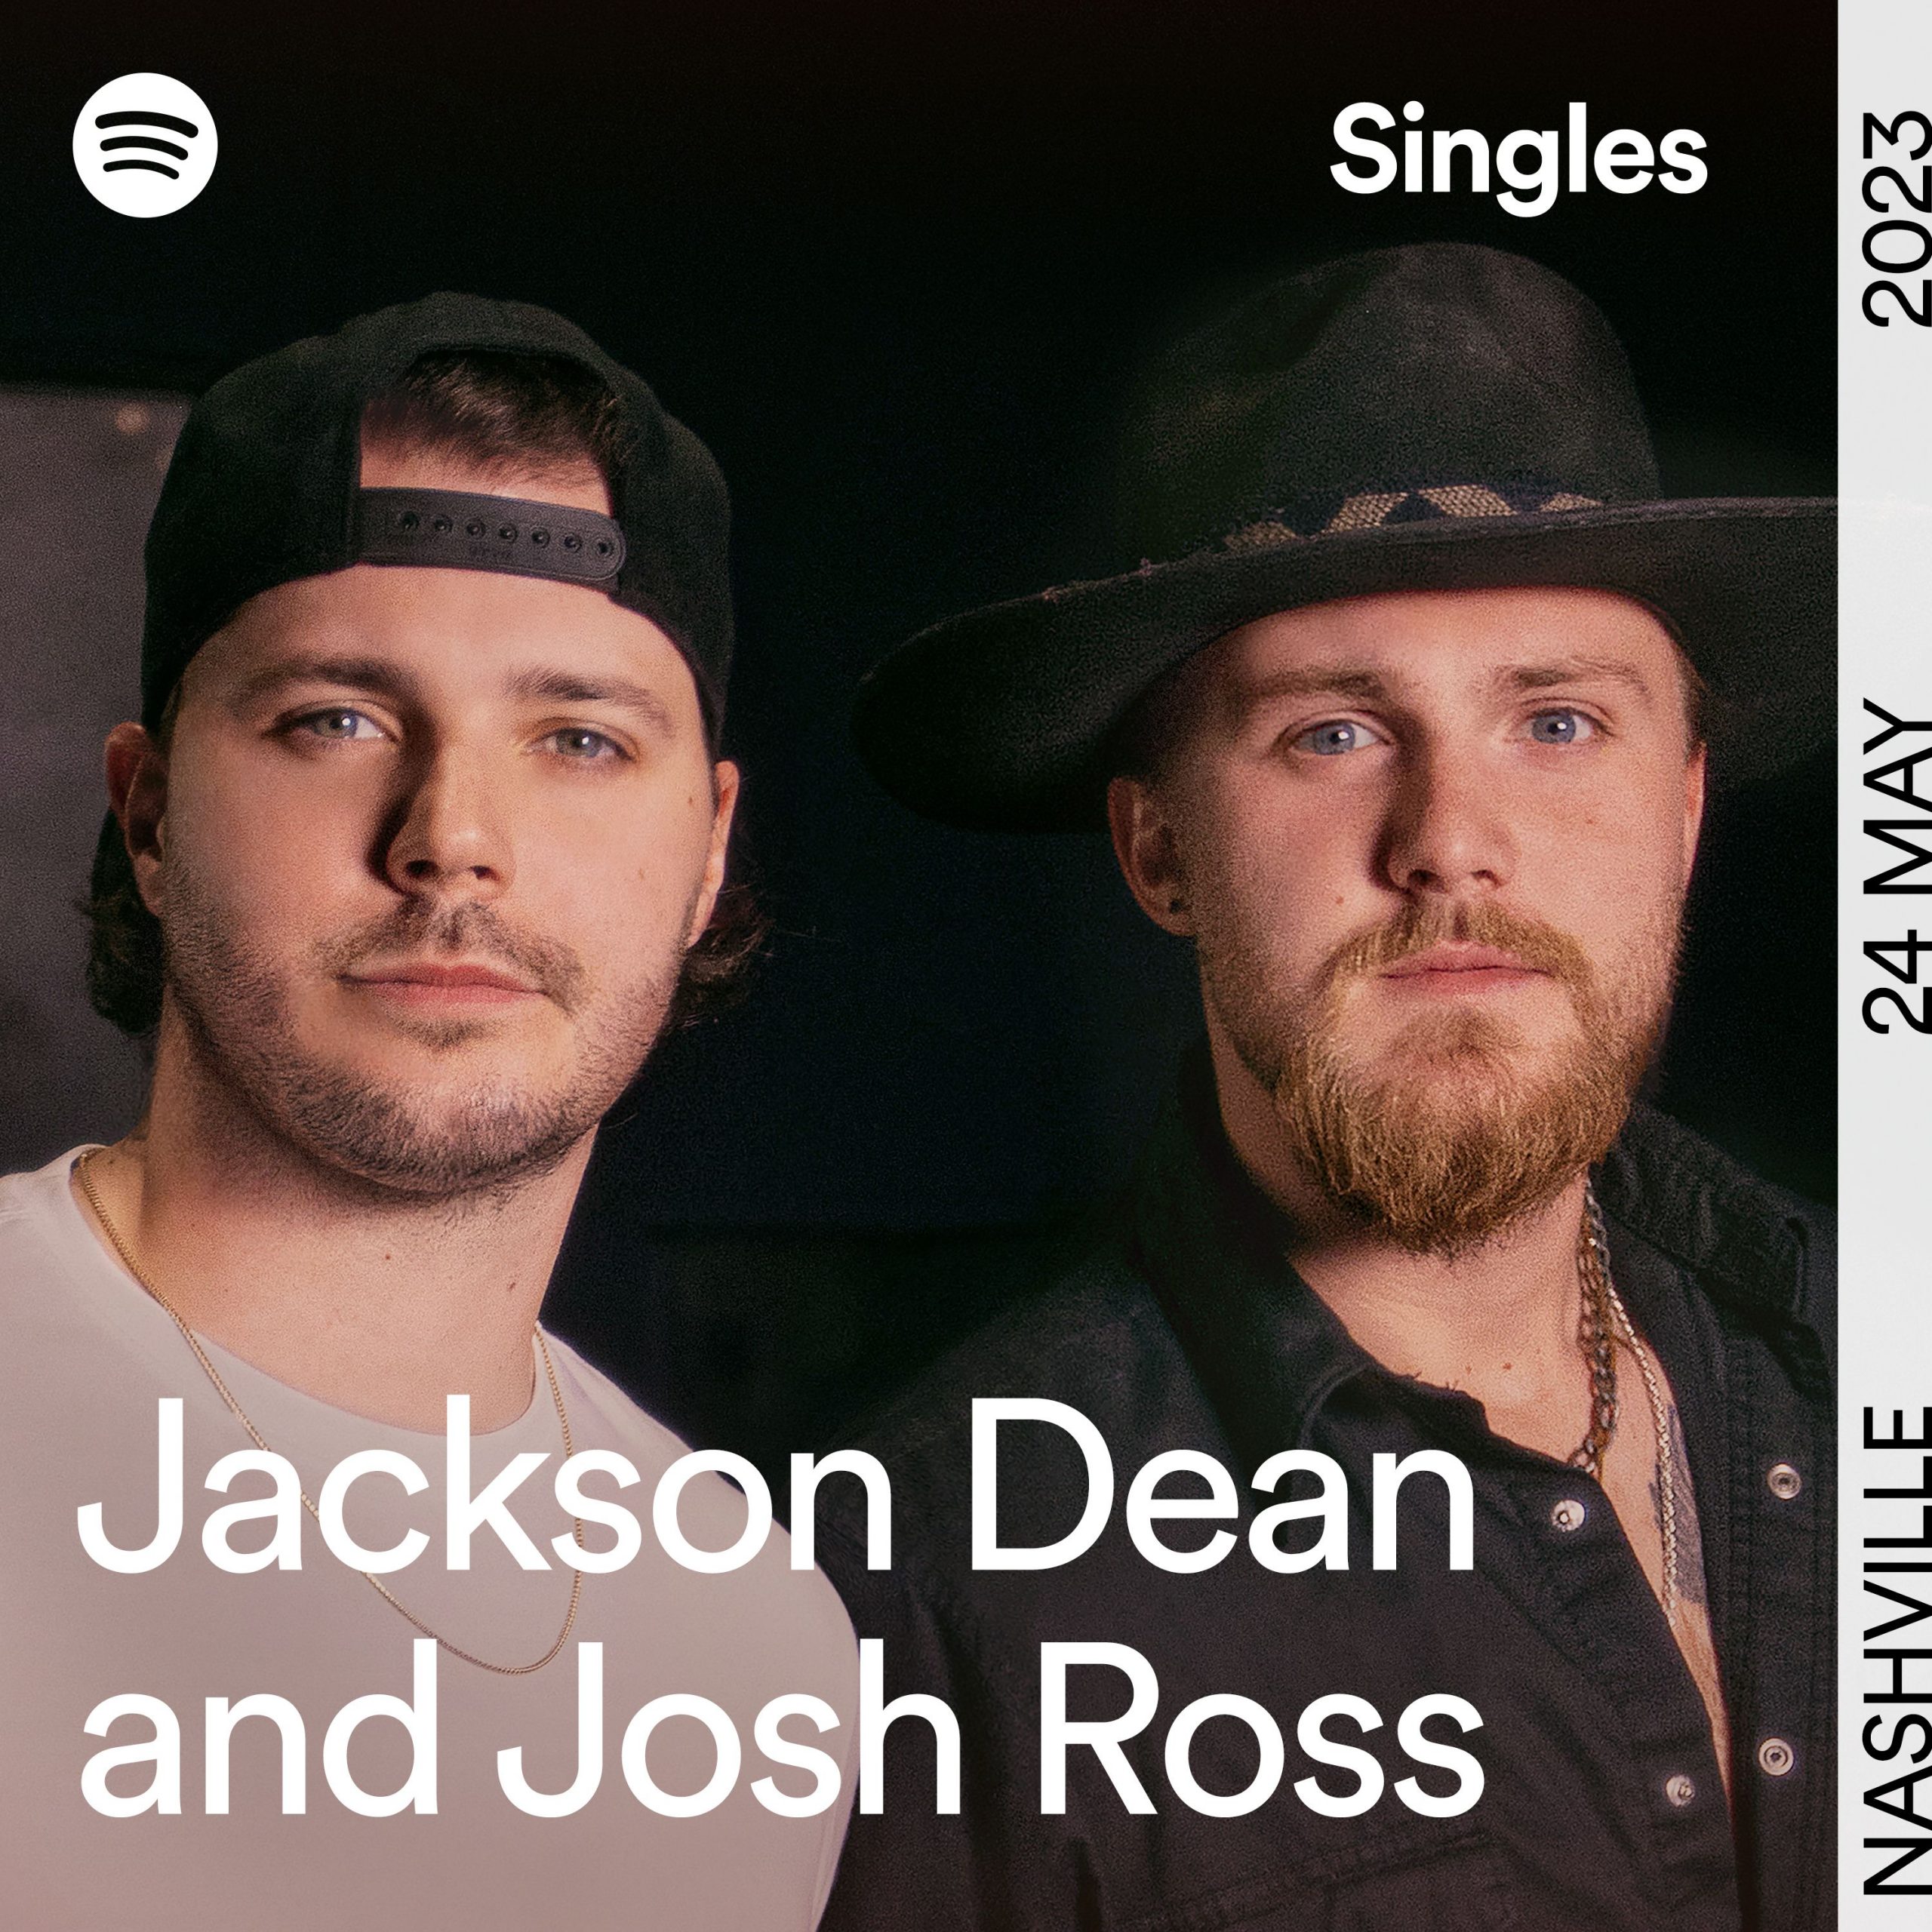 Listen Now: Josh Ross Releases Spotify Singles Cover of “Girl from the North Country” with Jackson Dean